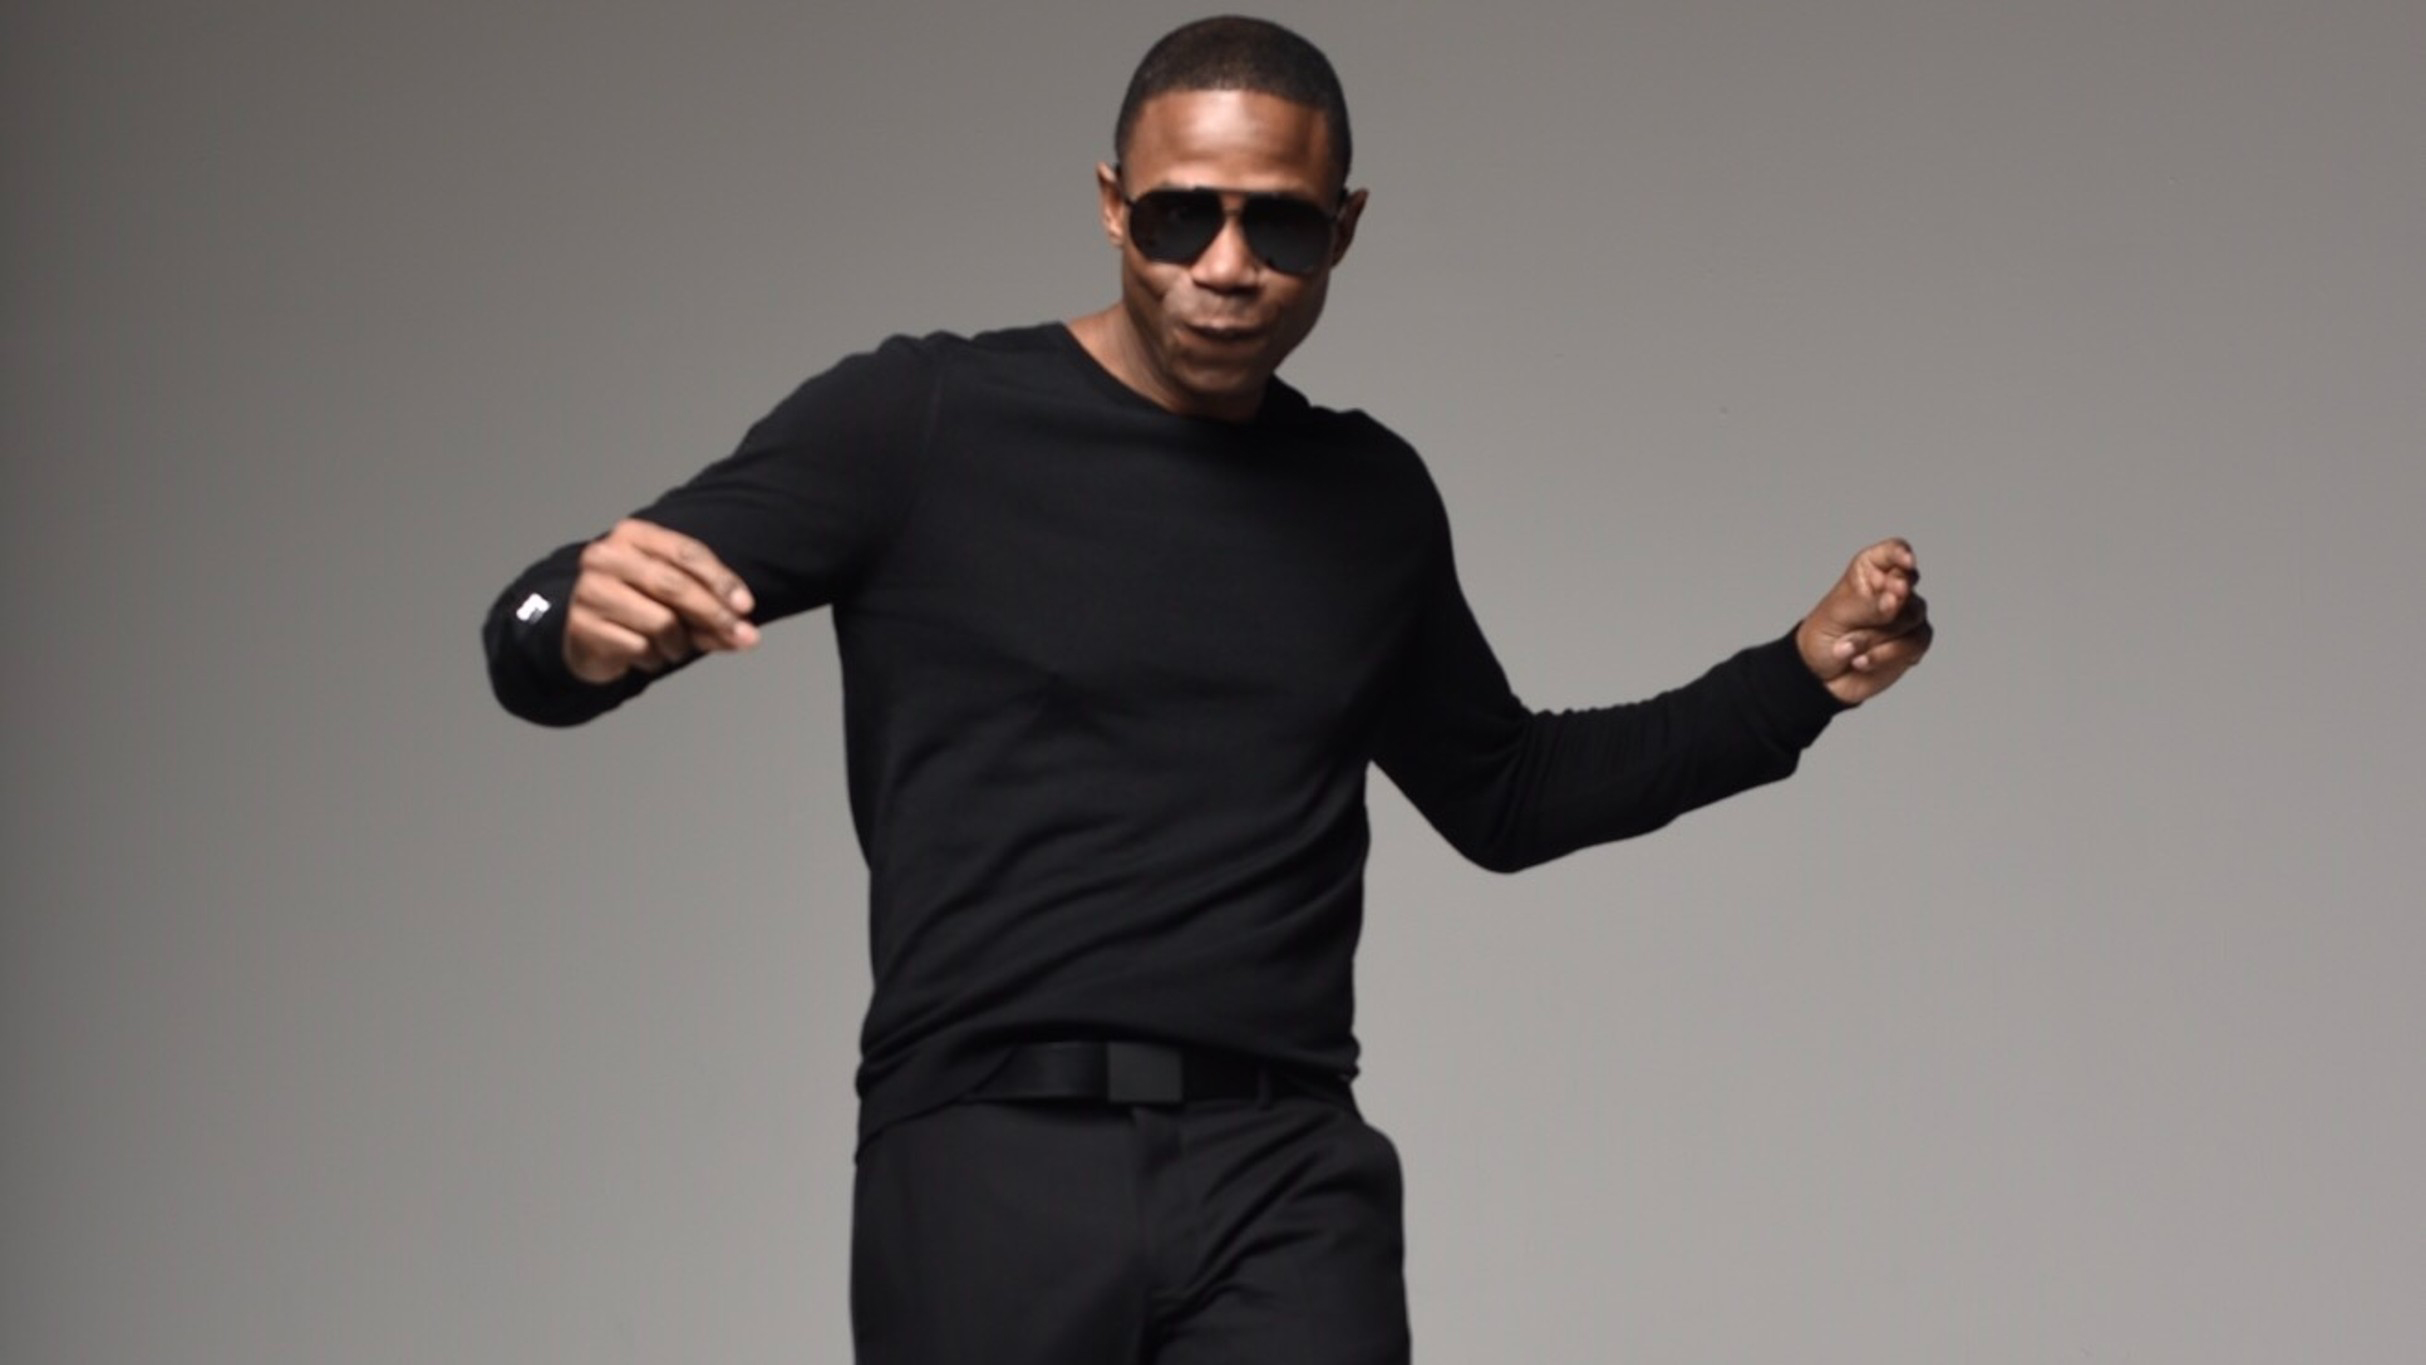 Legends of The Old School featuring Doug E. Fresh, Slick Rick & more